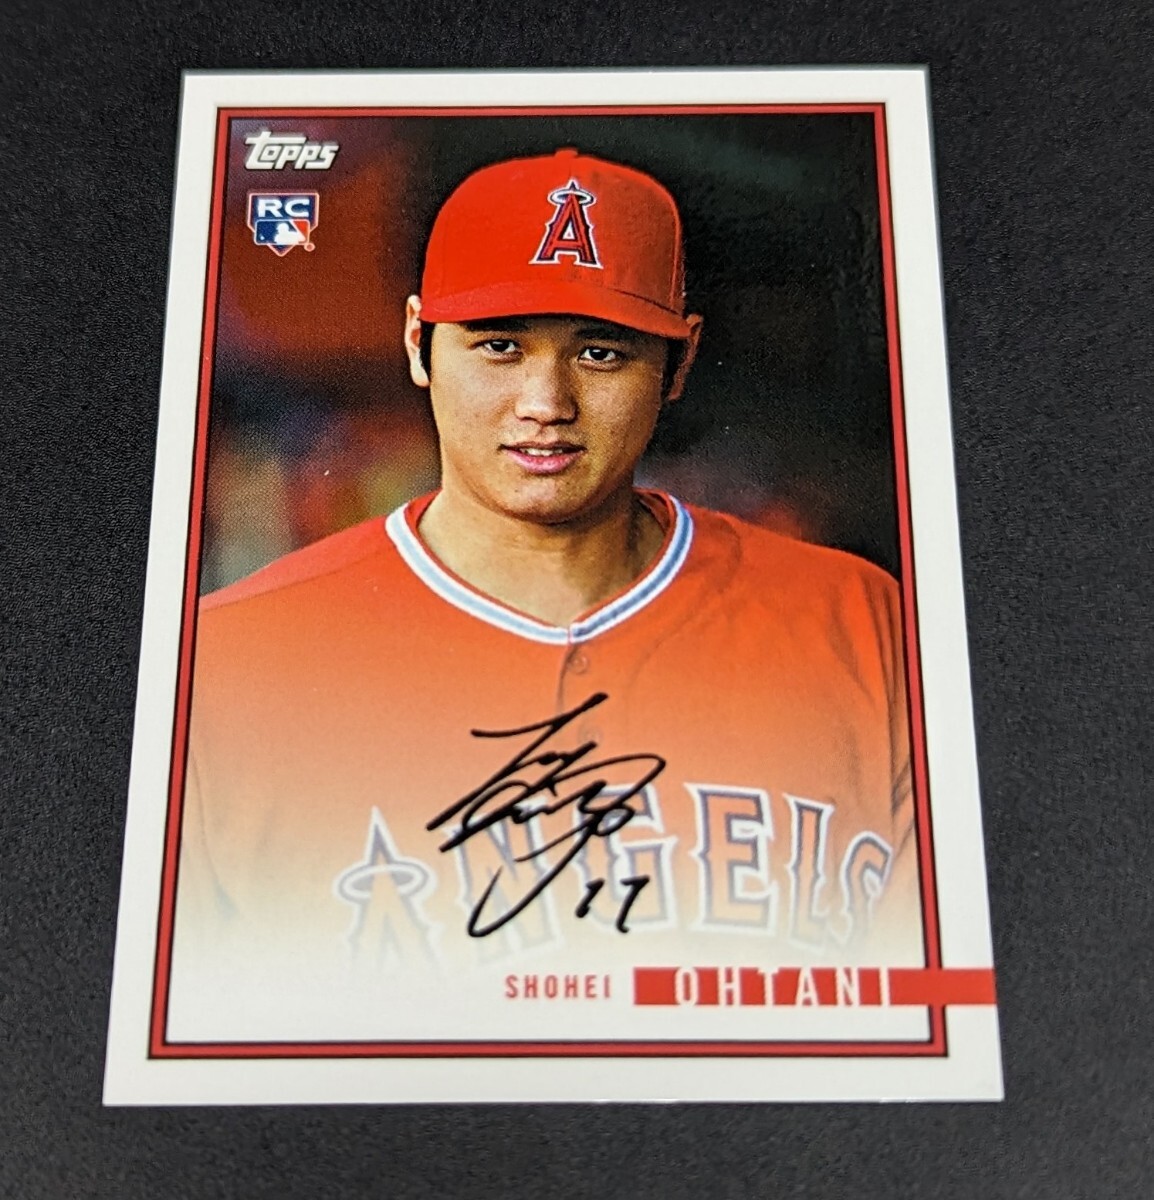 TOPPS 2018 On Demand Shohei Ohtani #29 Rookie Year in Review RC 大谷翔平の画像1